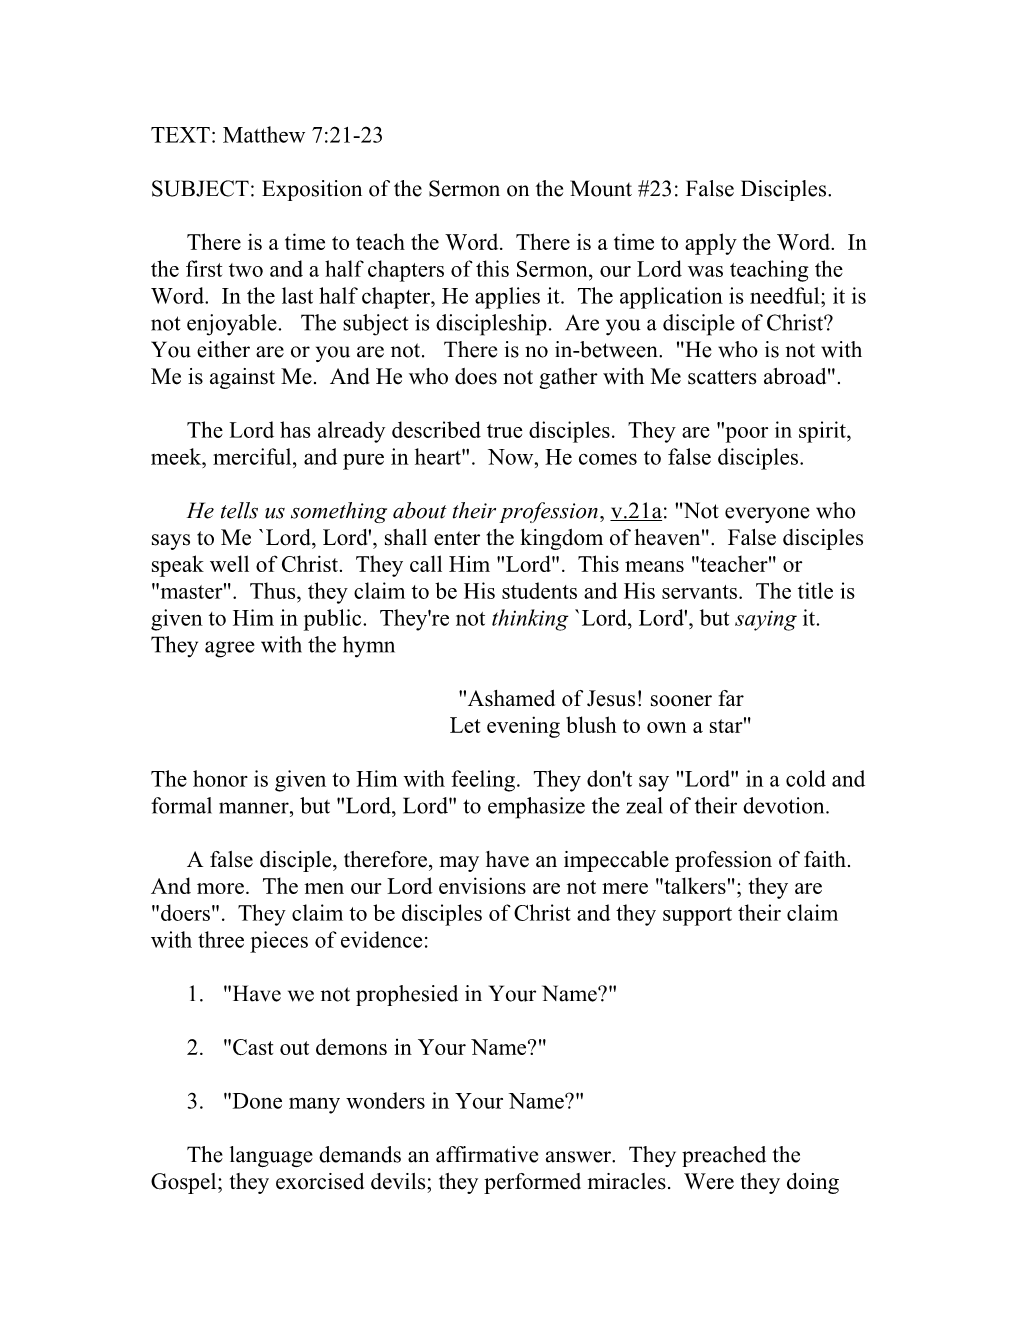 SUBJECT: Exposition of the Sermon on the Mount #23: False Disciples